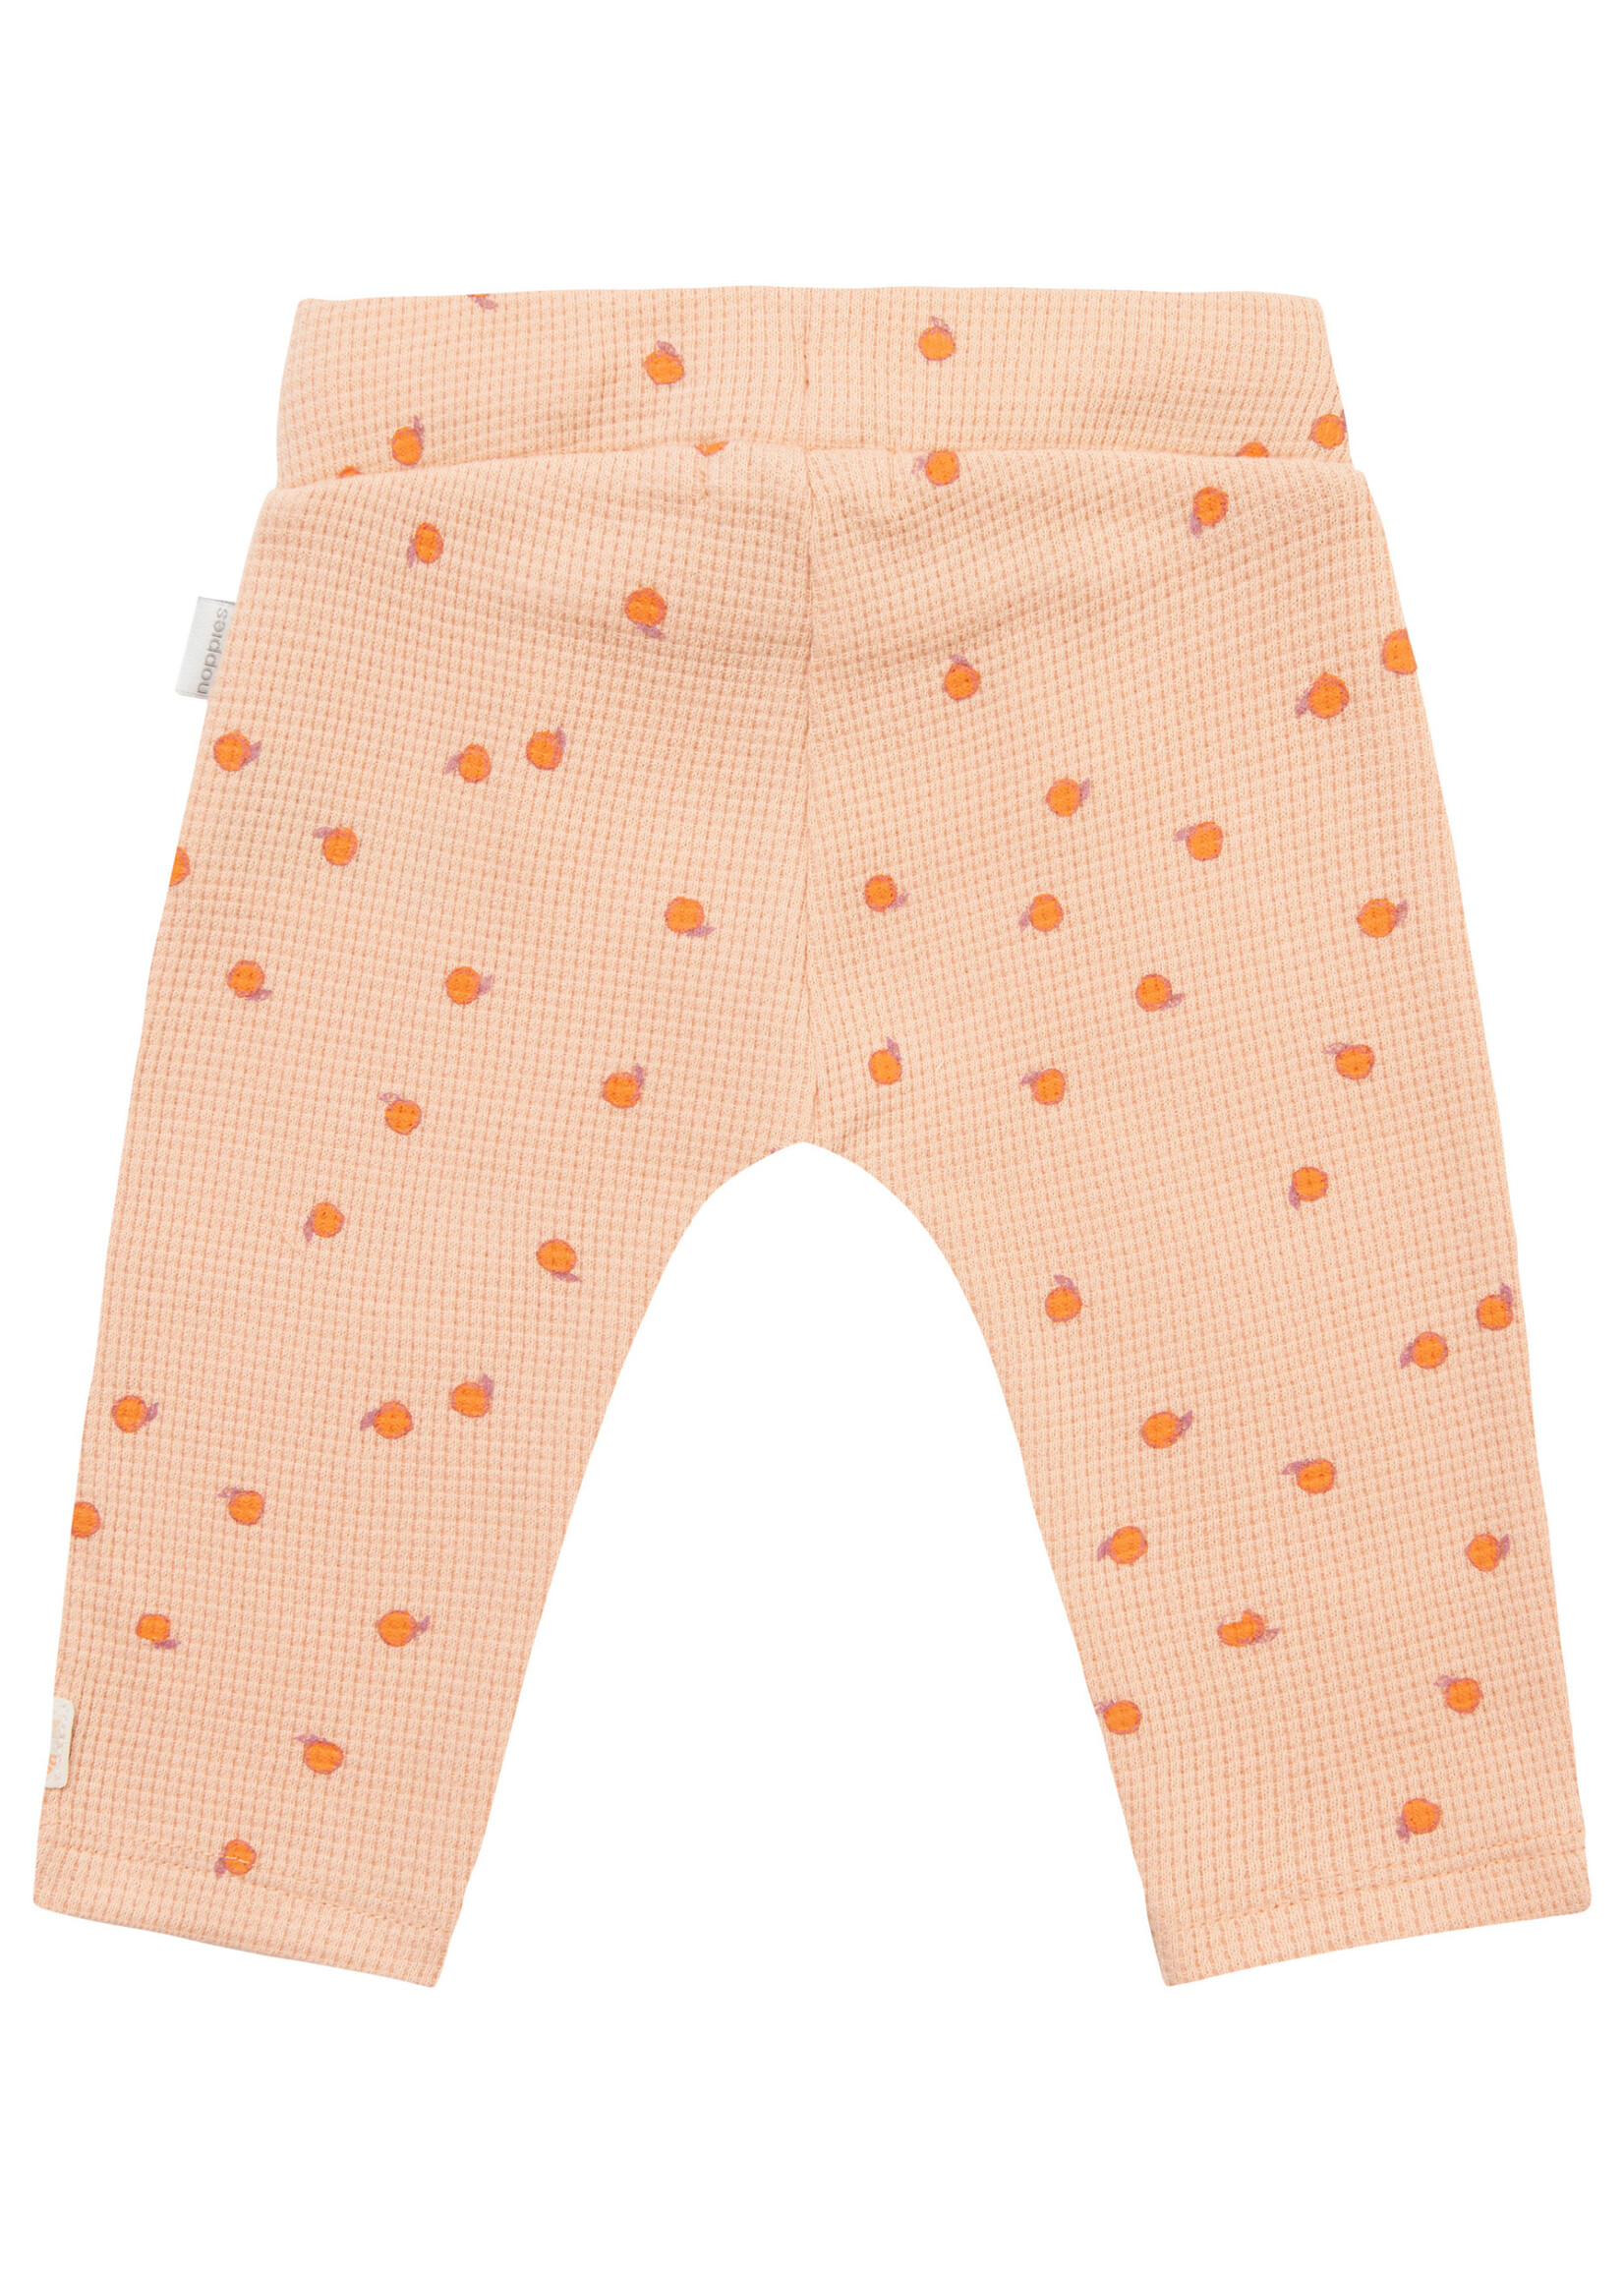 Noppies Noppies-Girls Pants North Belle all over print